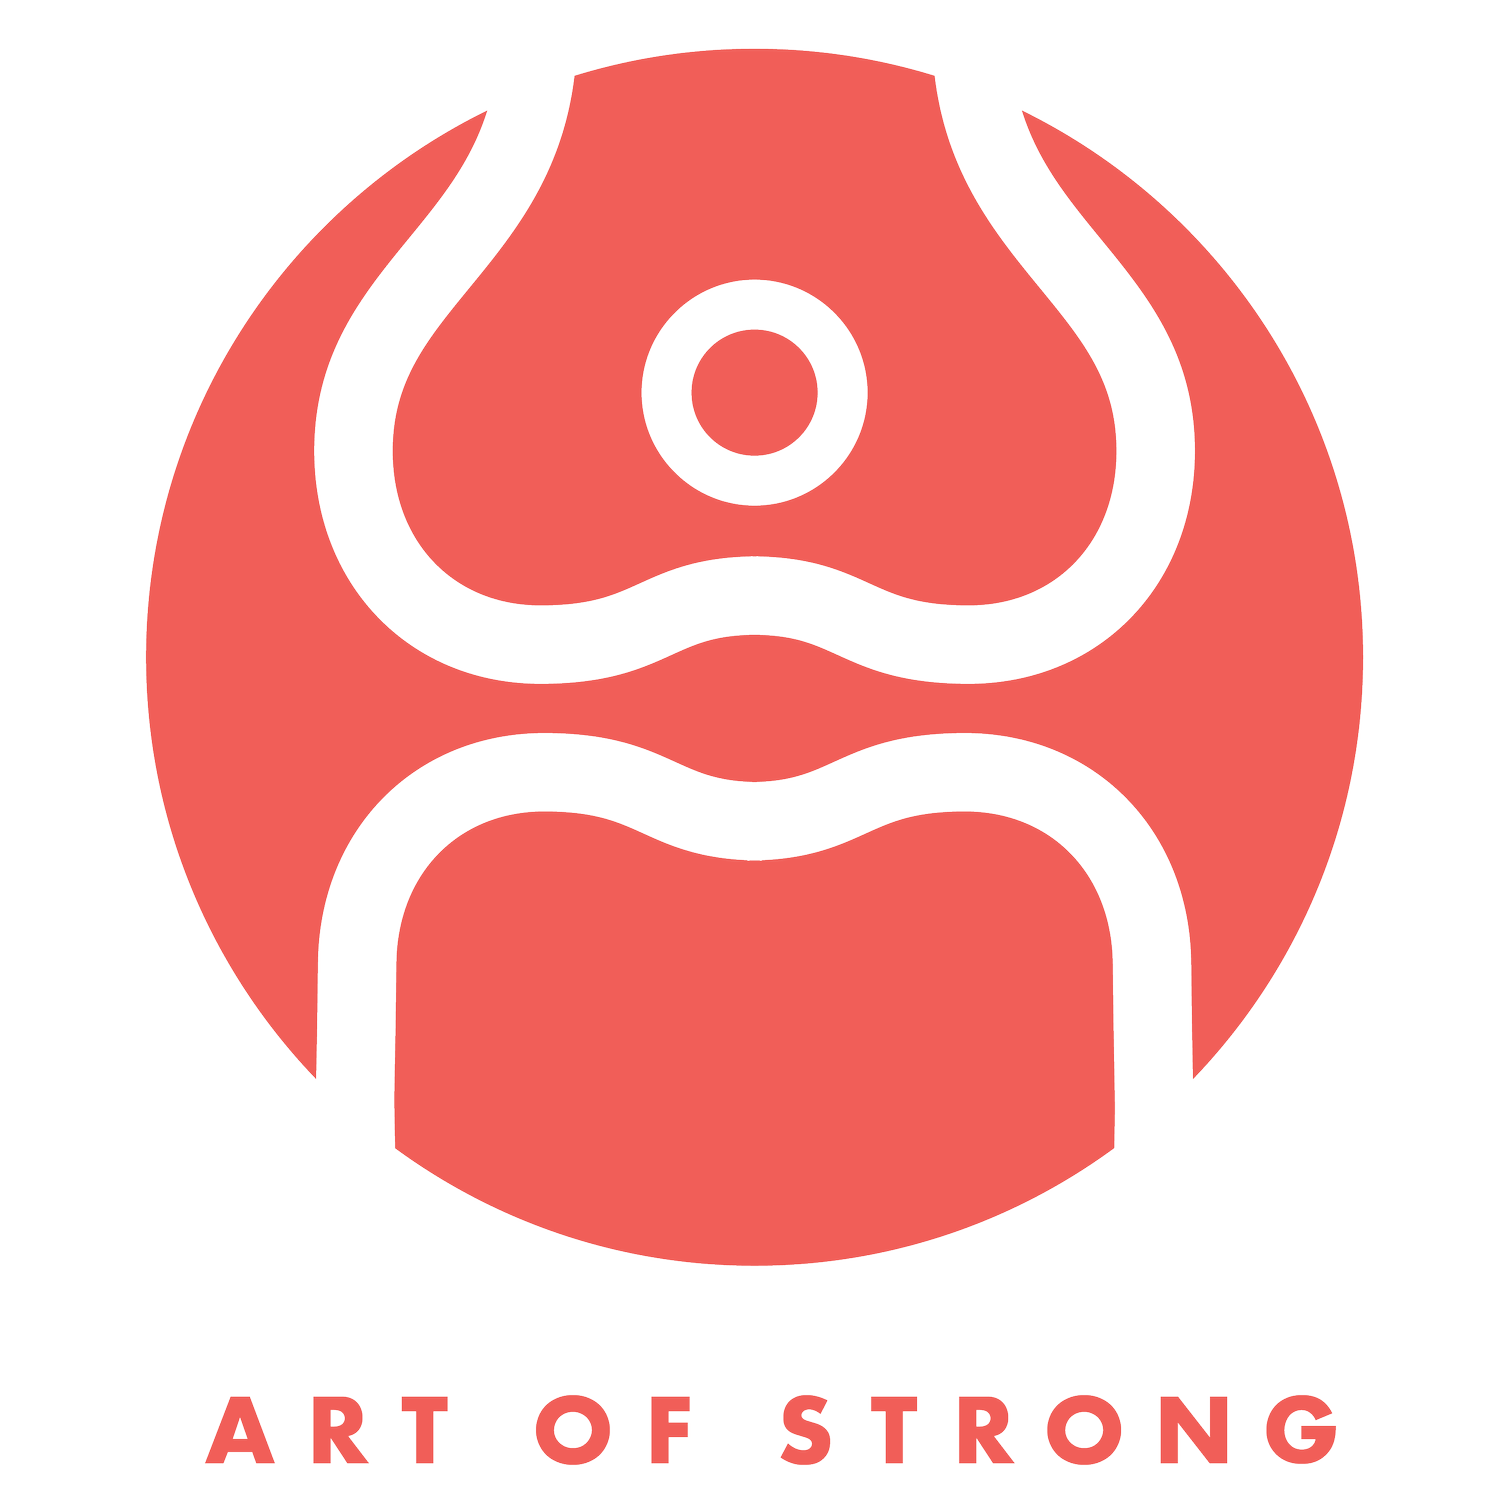 The Art of Strong